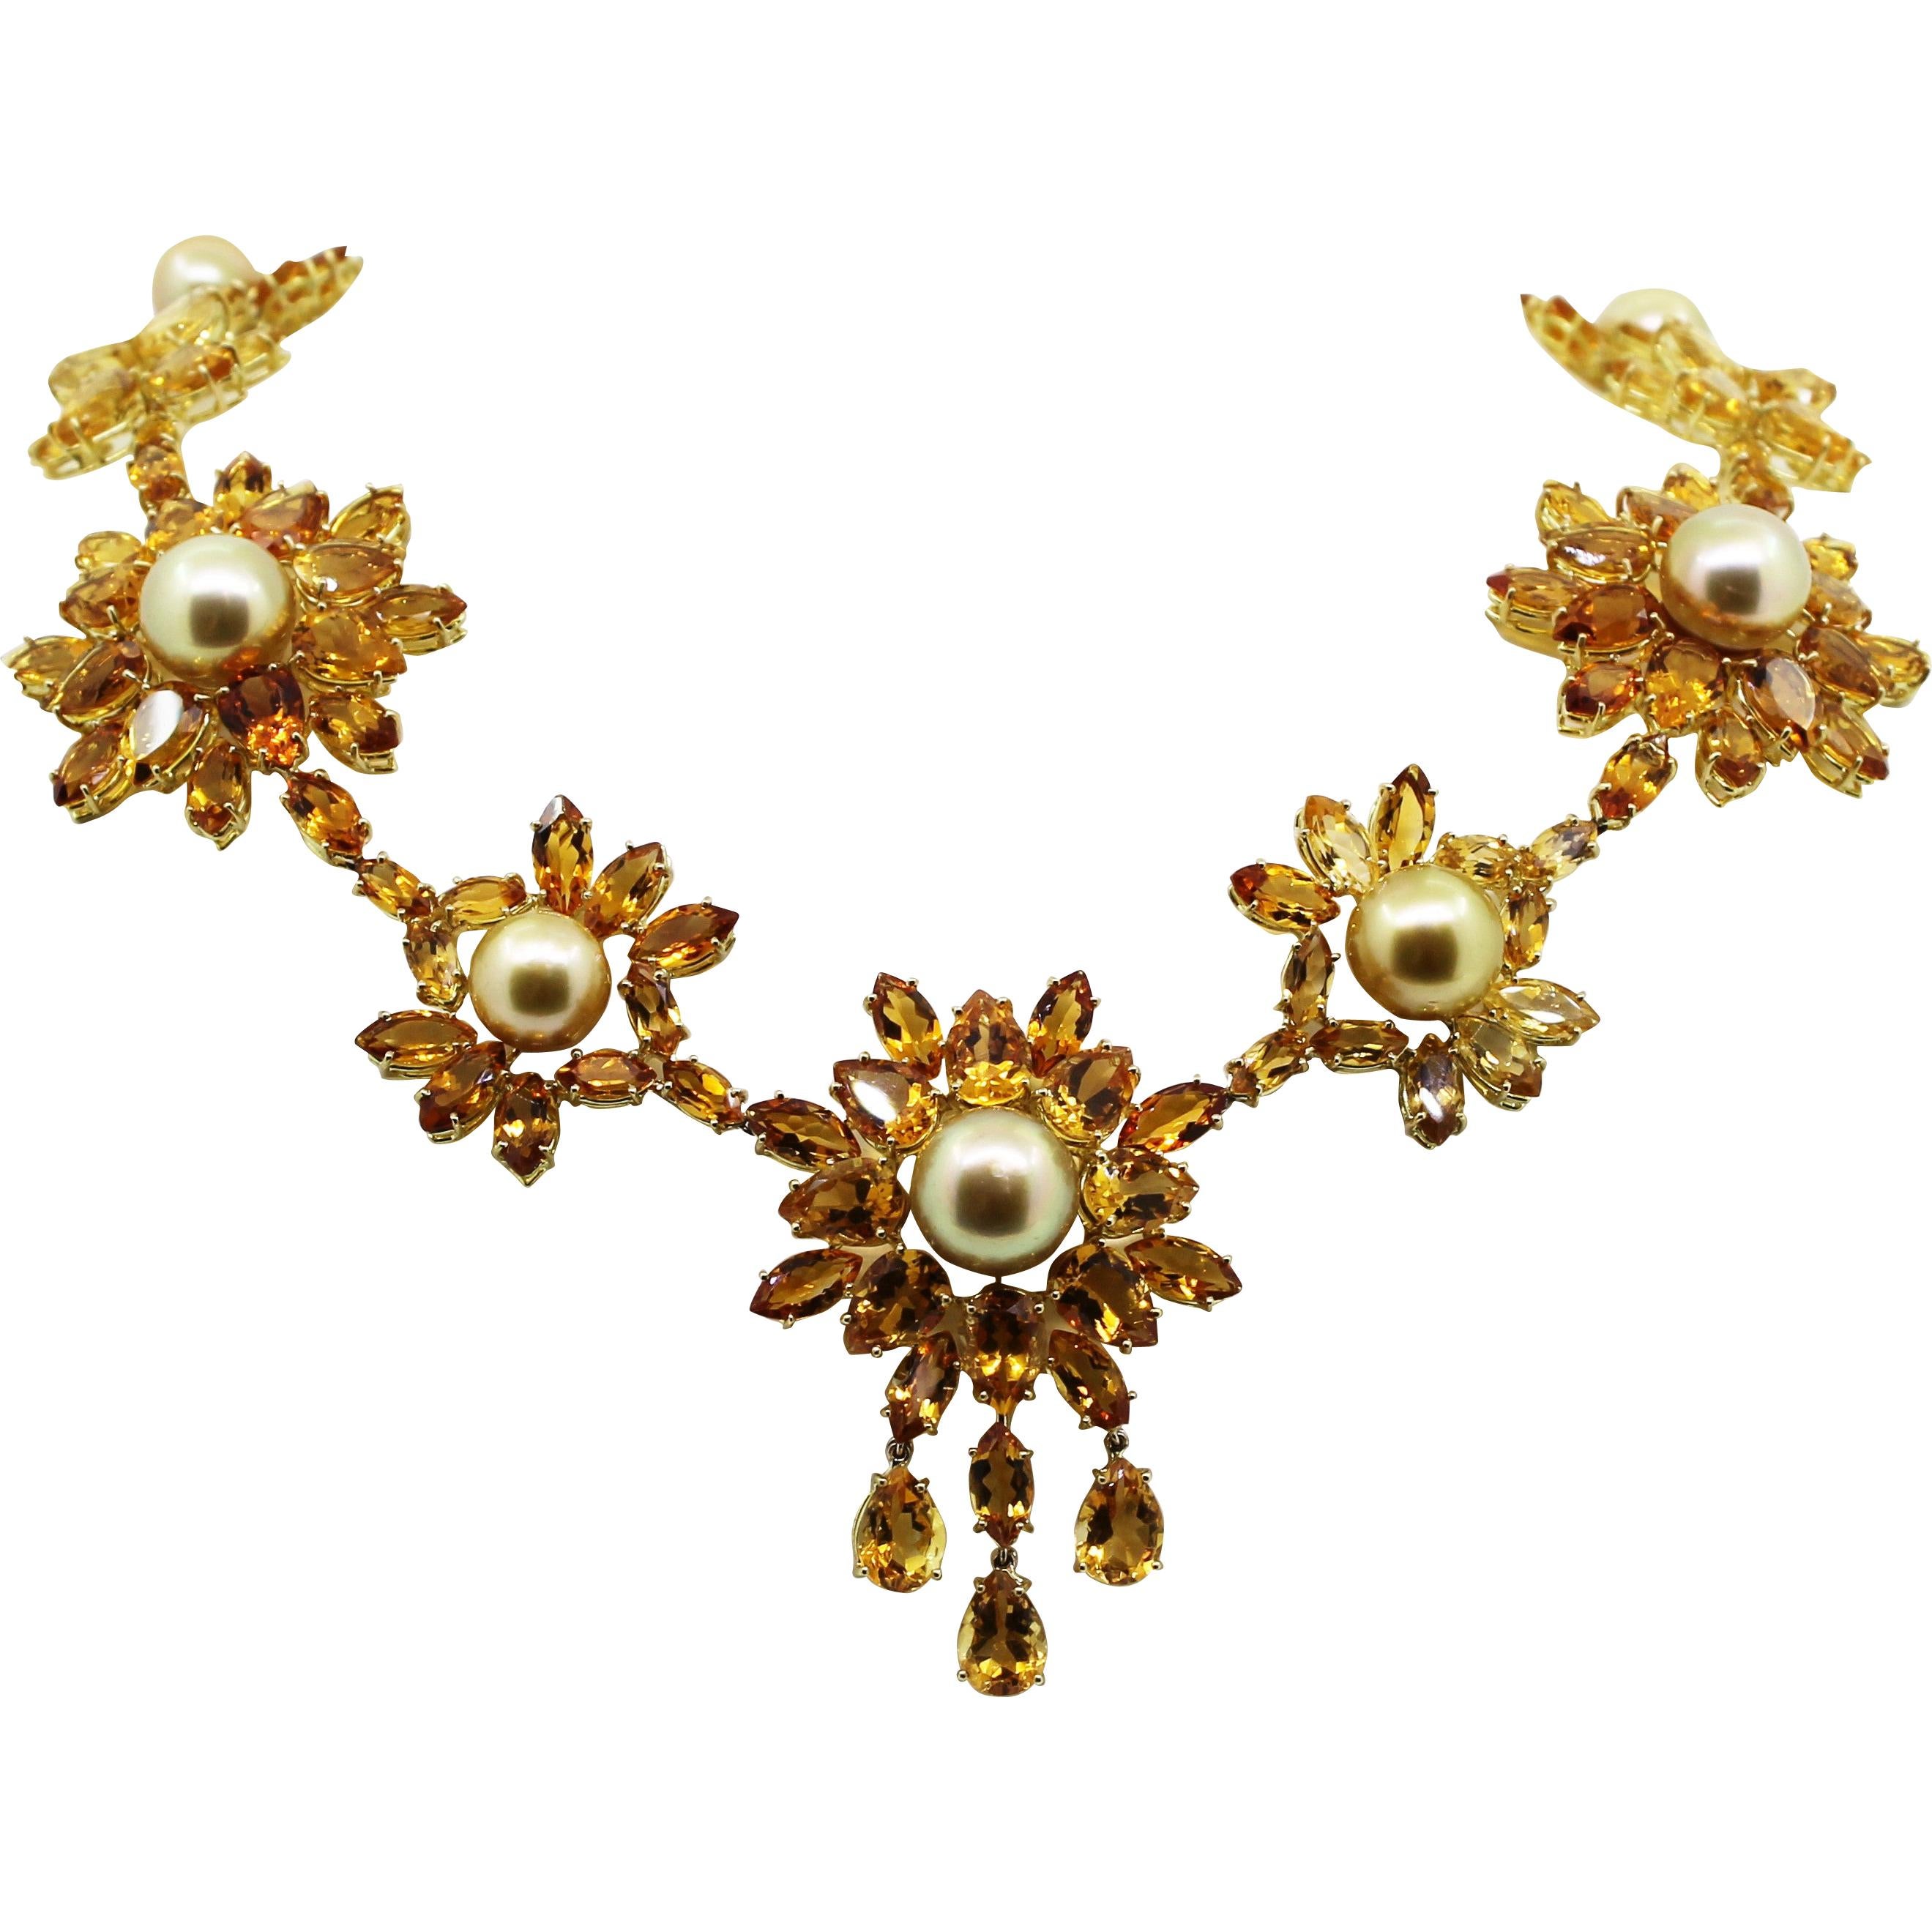 An oversized Golden Pearls and Deep Yellow Citrine Beaded Necklace, ideal for almost every occasion.

The 7 Natural Colour Golden Pearls of 84.00 Carat Total, are in the centre of Deep Yellow Marquise Citrine flowers.
This bright and solar Beaded